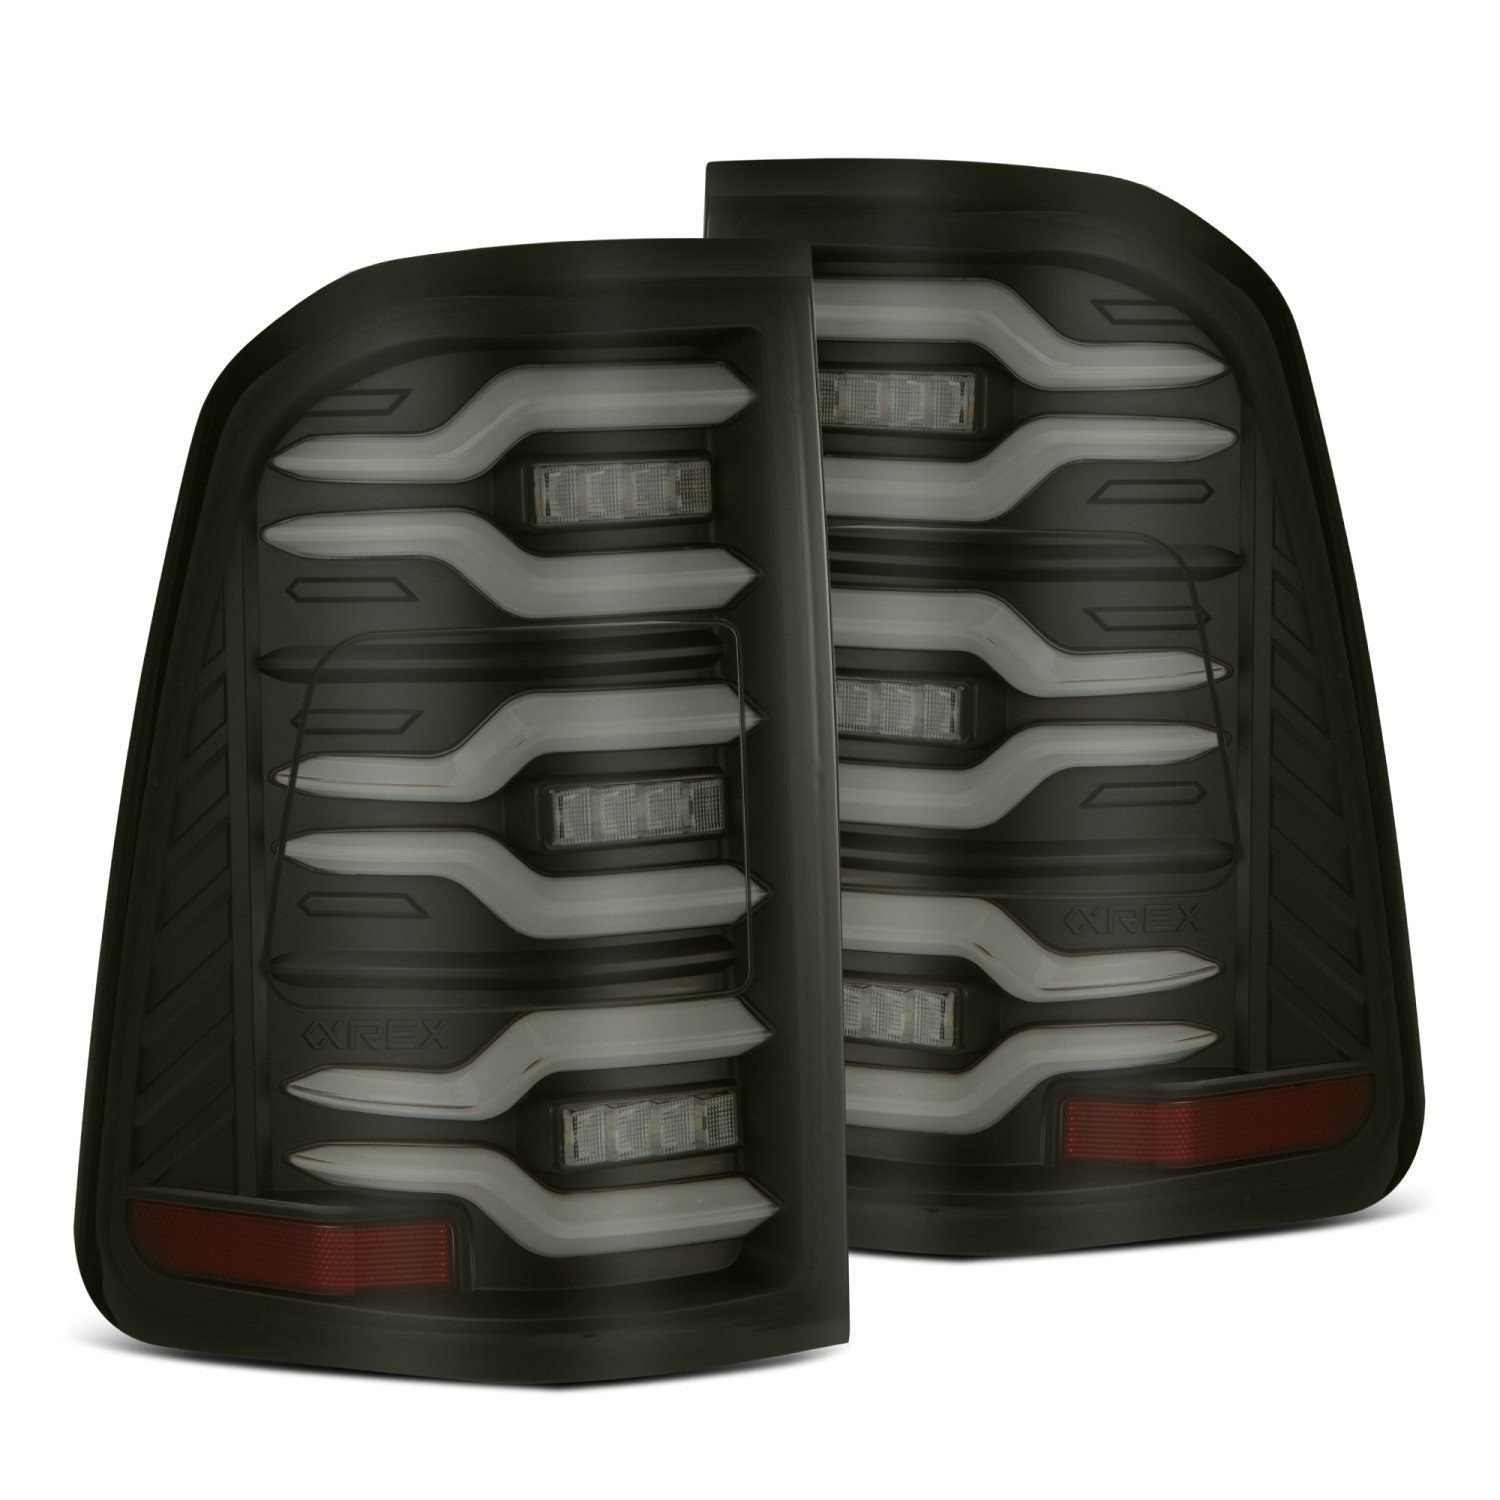 640040 Pro Series Taillights for 2019-2022 RAM 1500 - Black